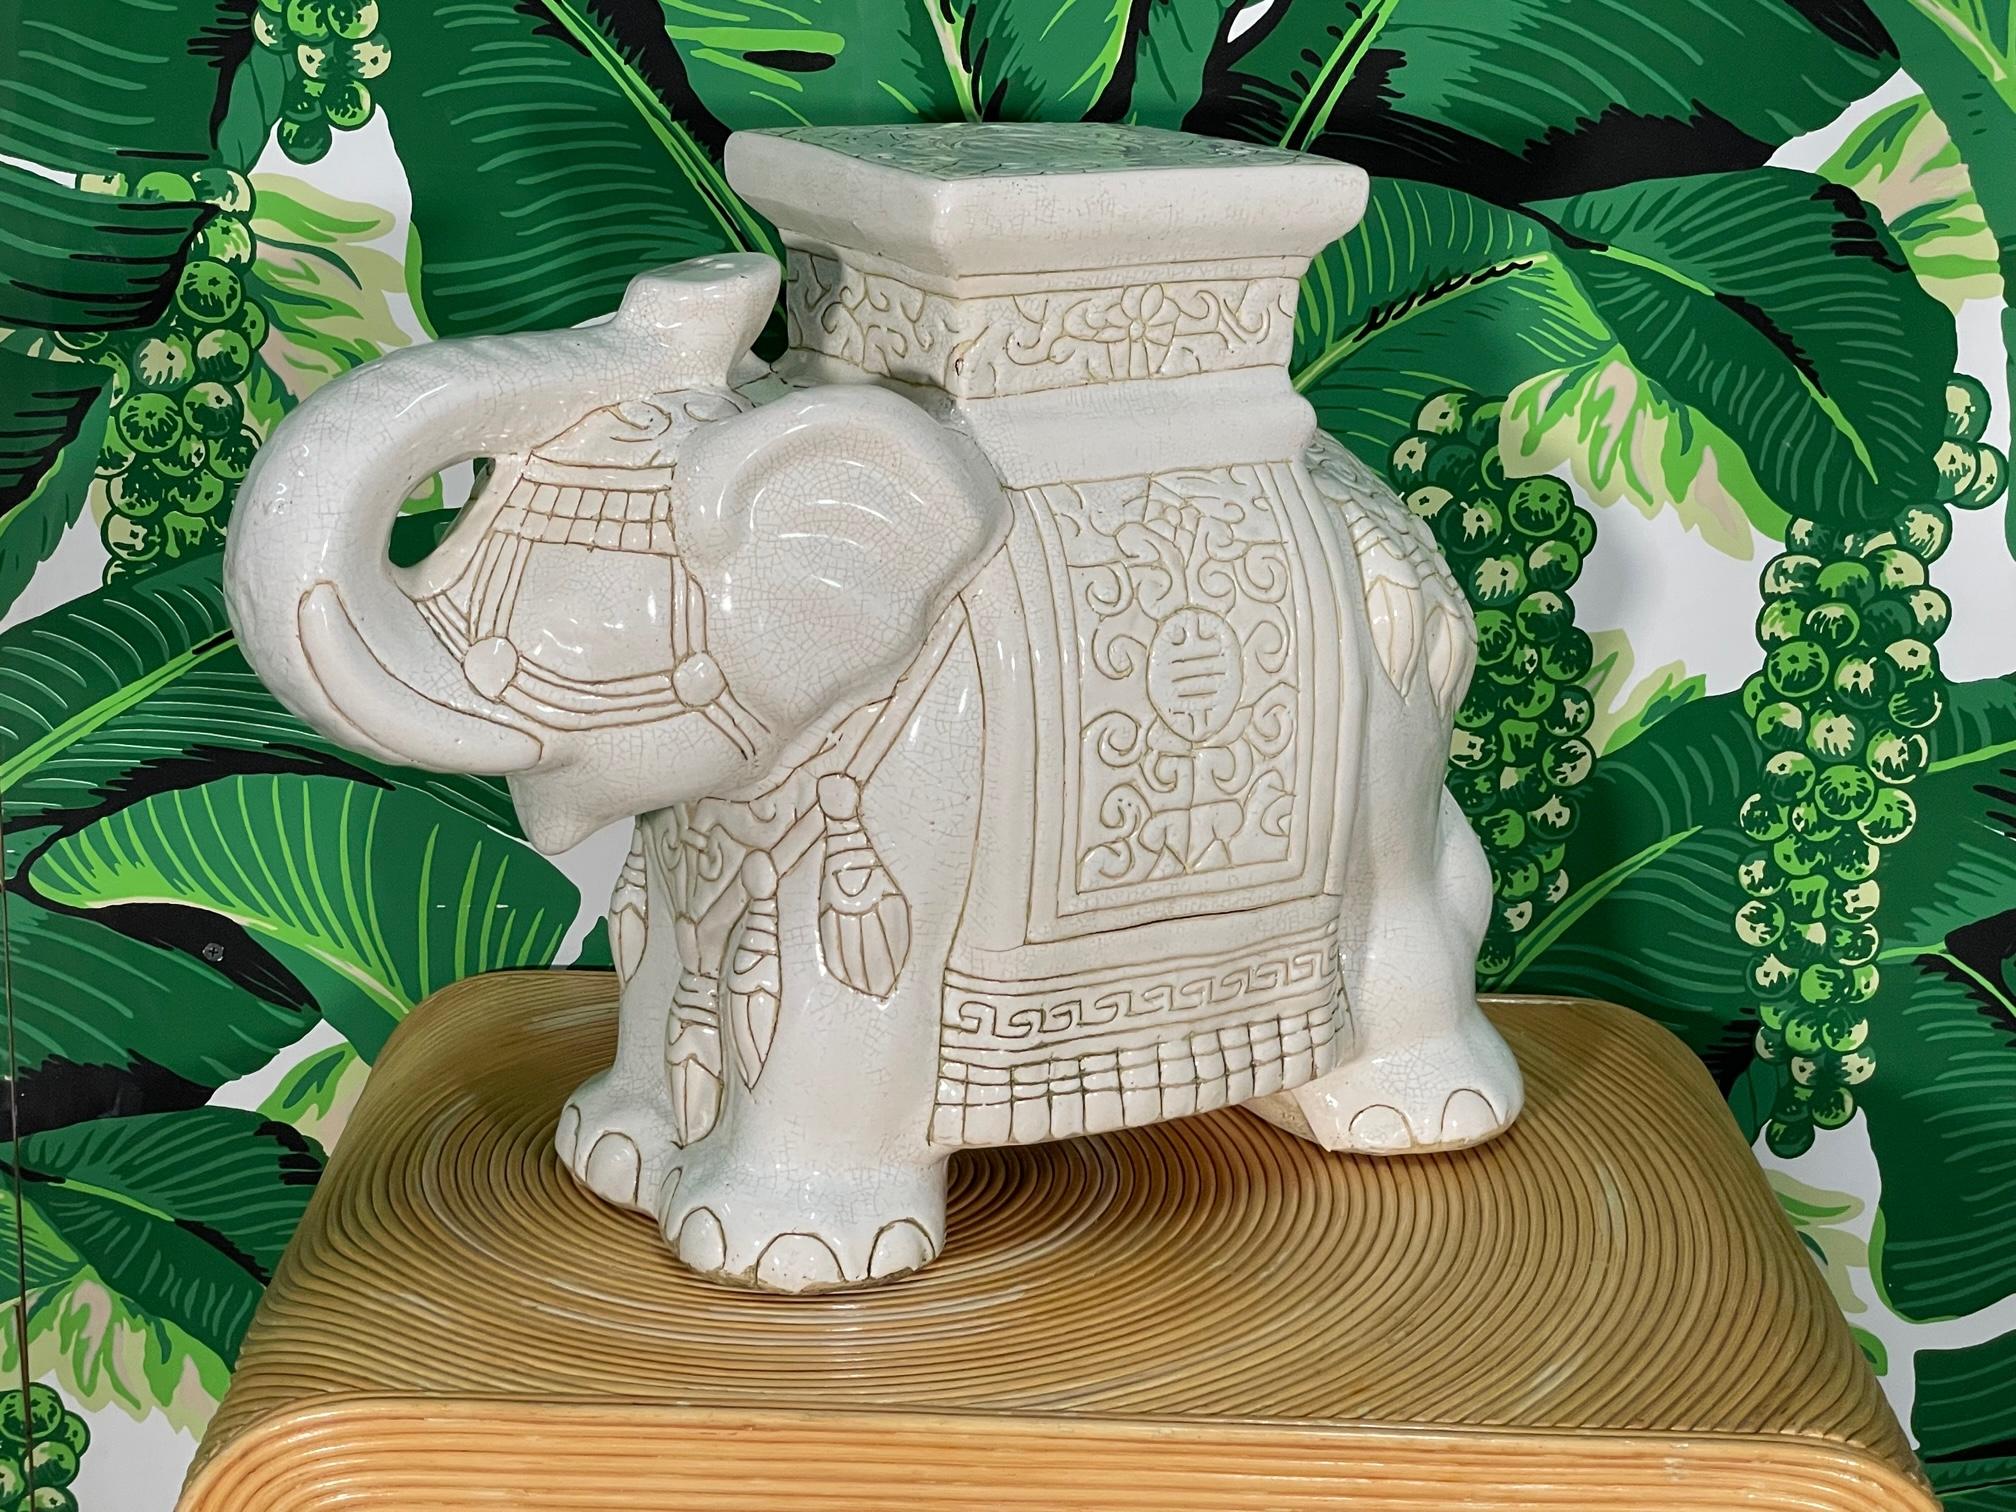 Ceramic elephant garden seat (or end table for cocktails) features a bright, glazed finish and a raised trunk signifying good luck. Good condition with imperfections consistent with age, see photos for condition details.

